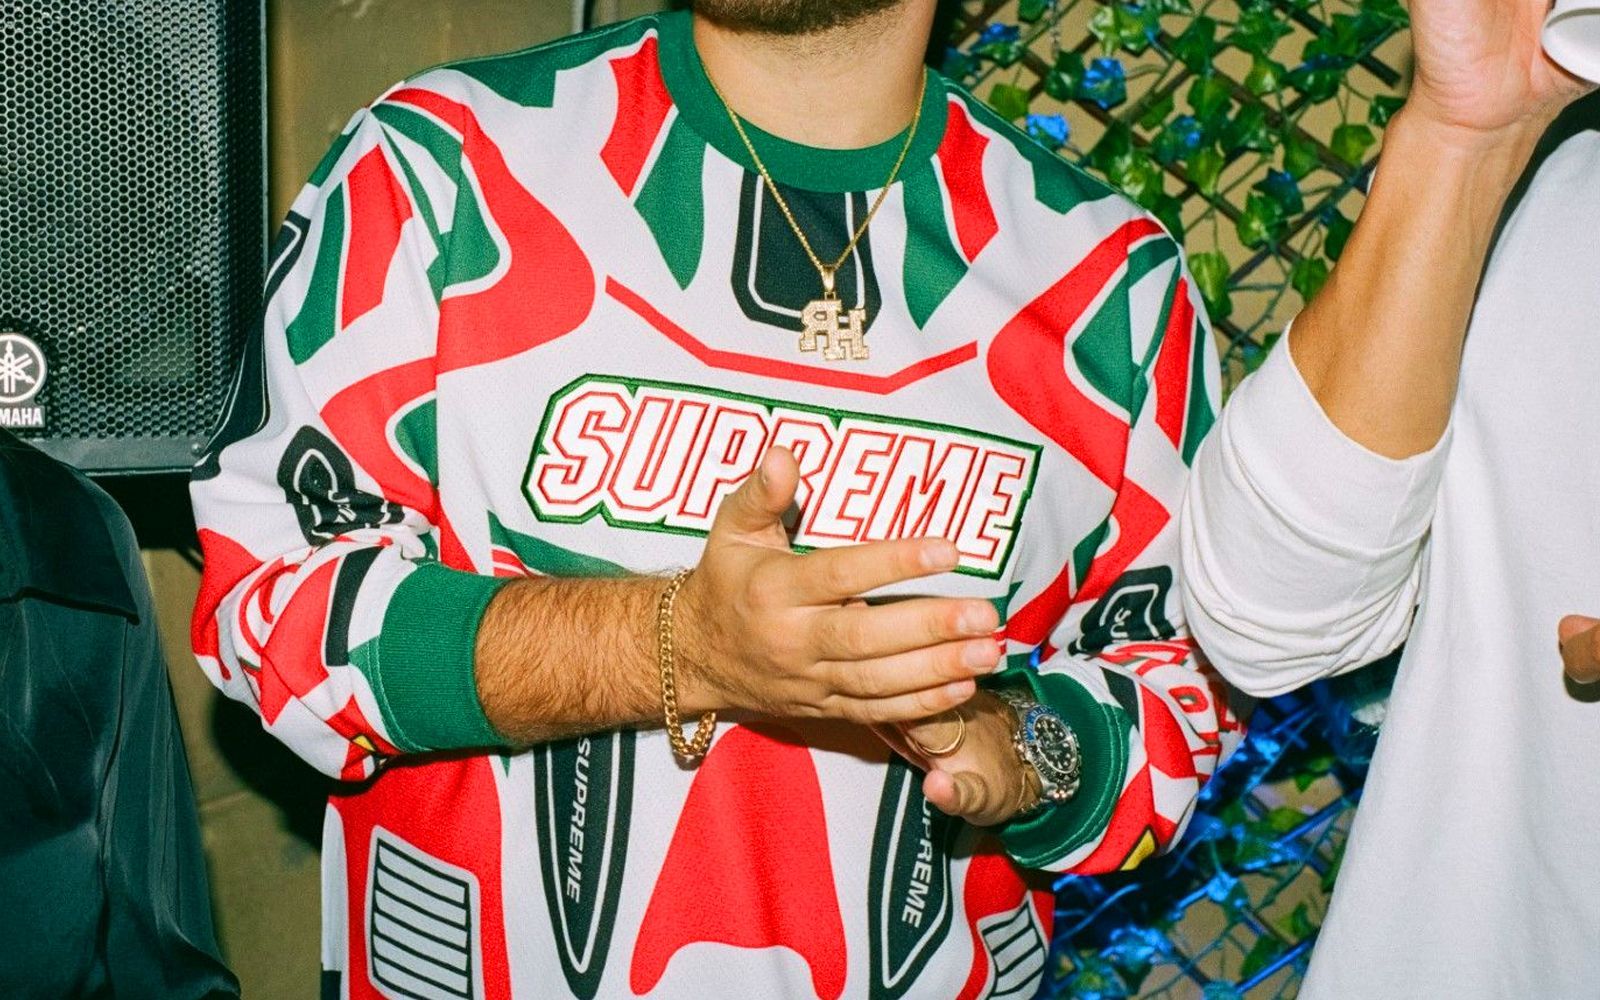 What's next for Supreme?